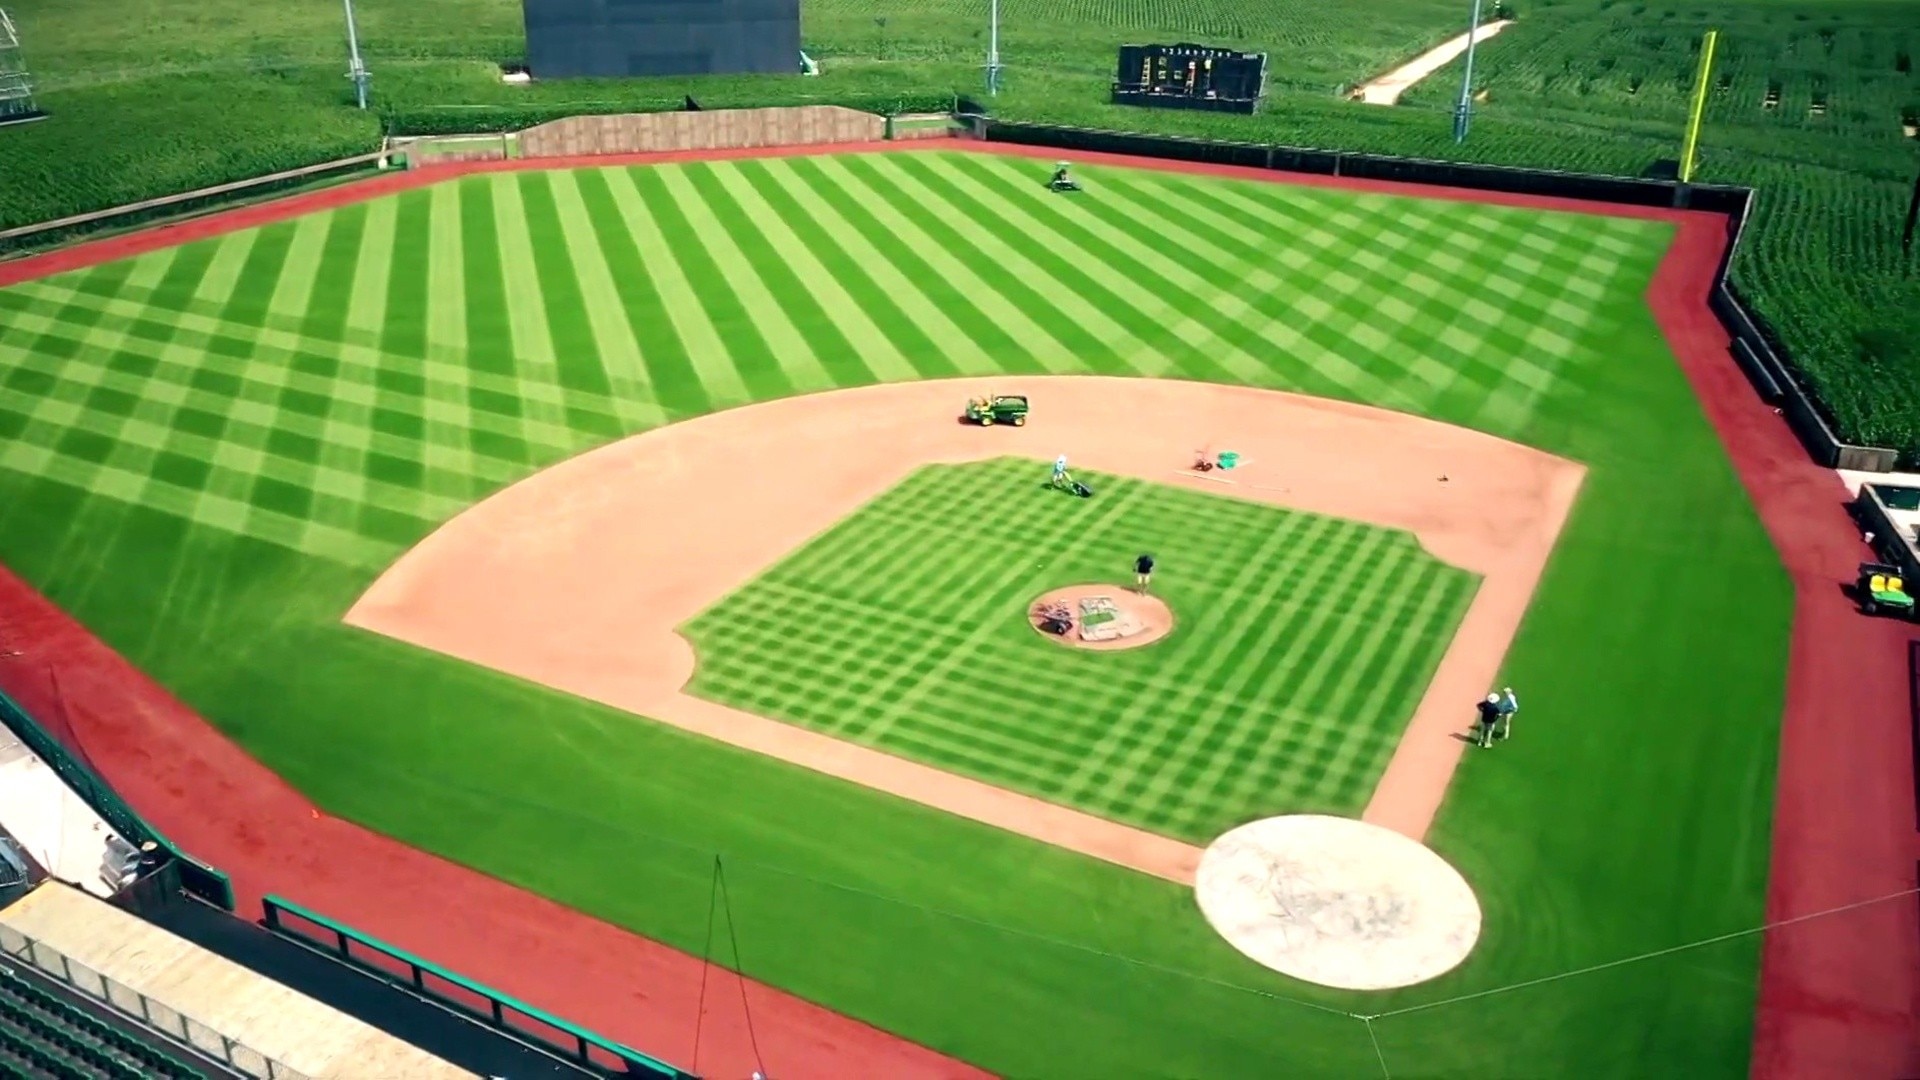 Watch TODAY Excerpt ‘Field of Dreams’ town prepares to host its 1st